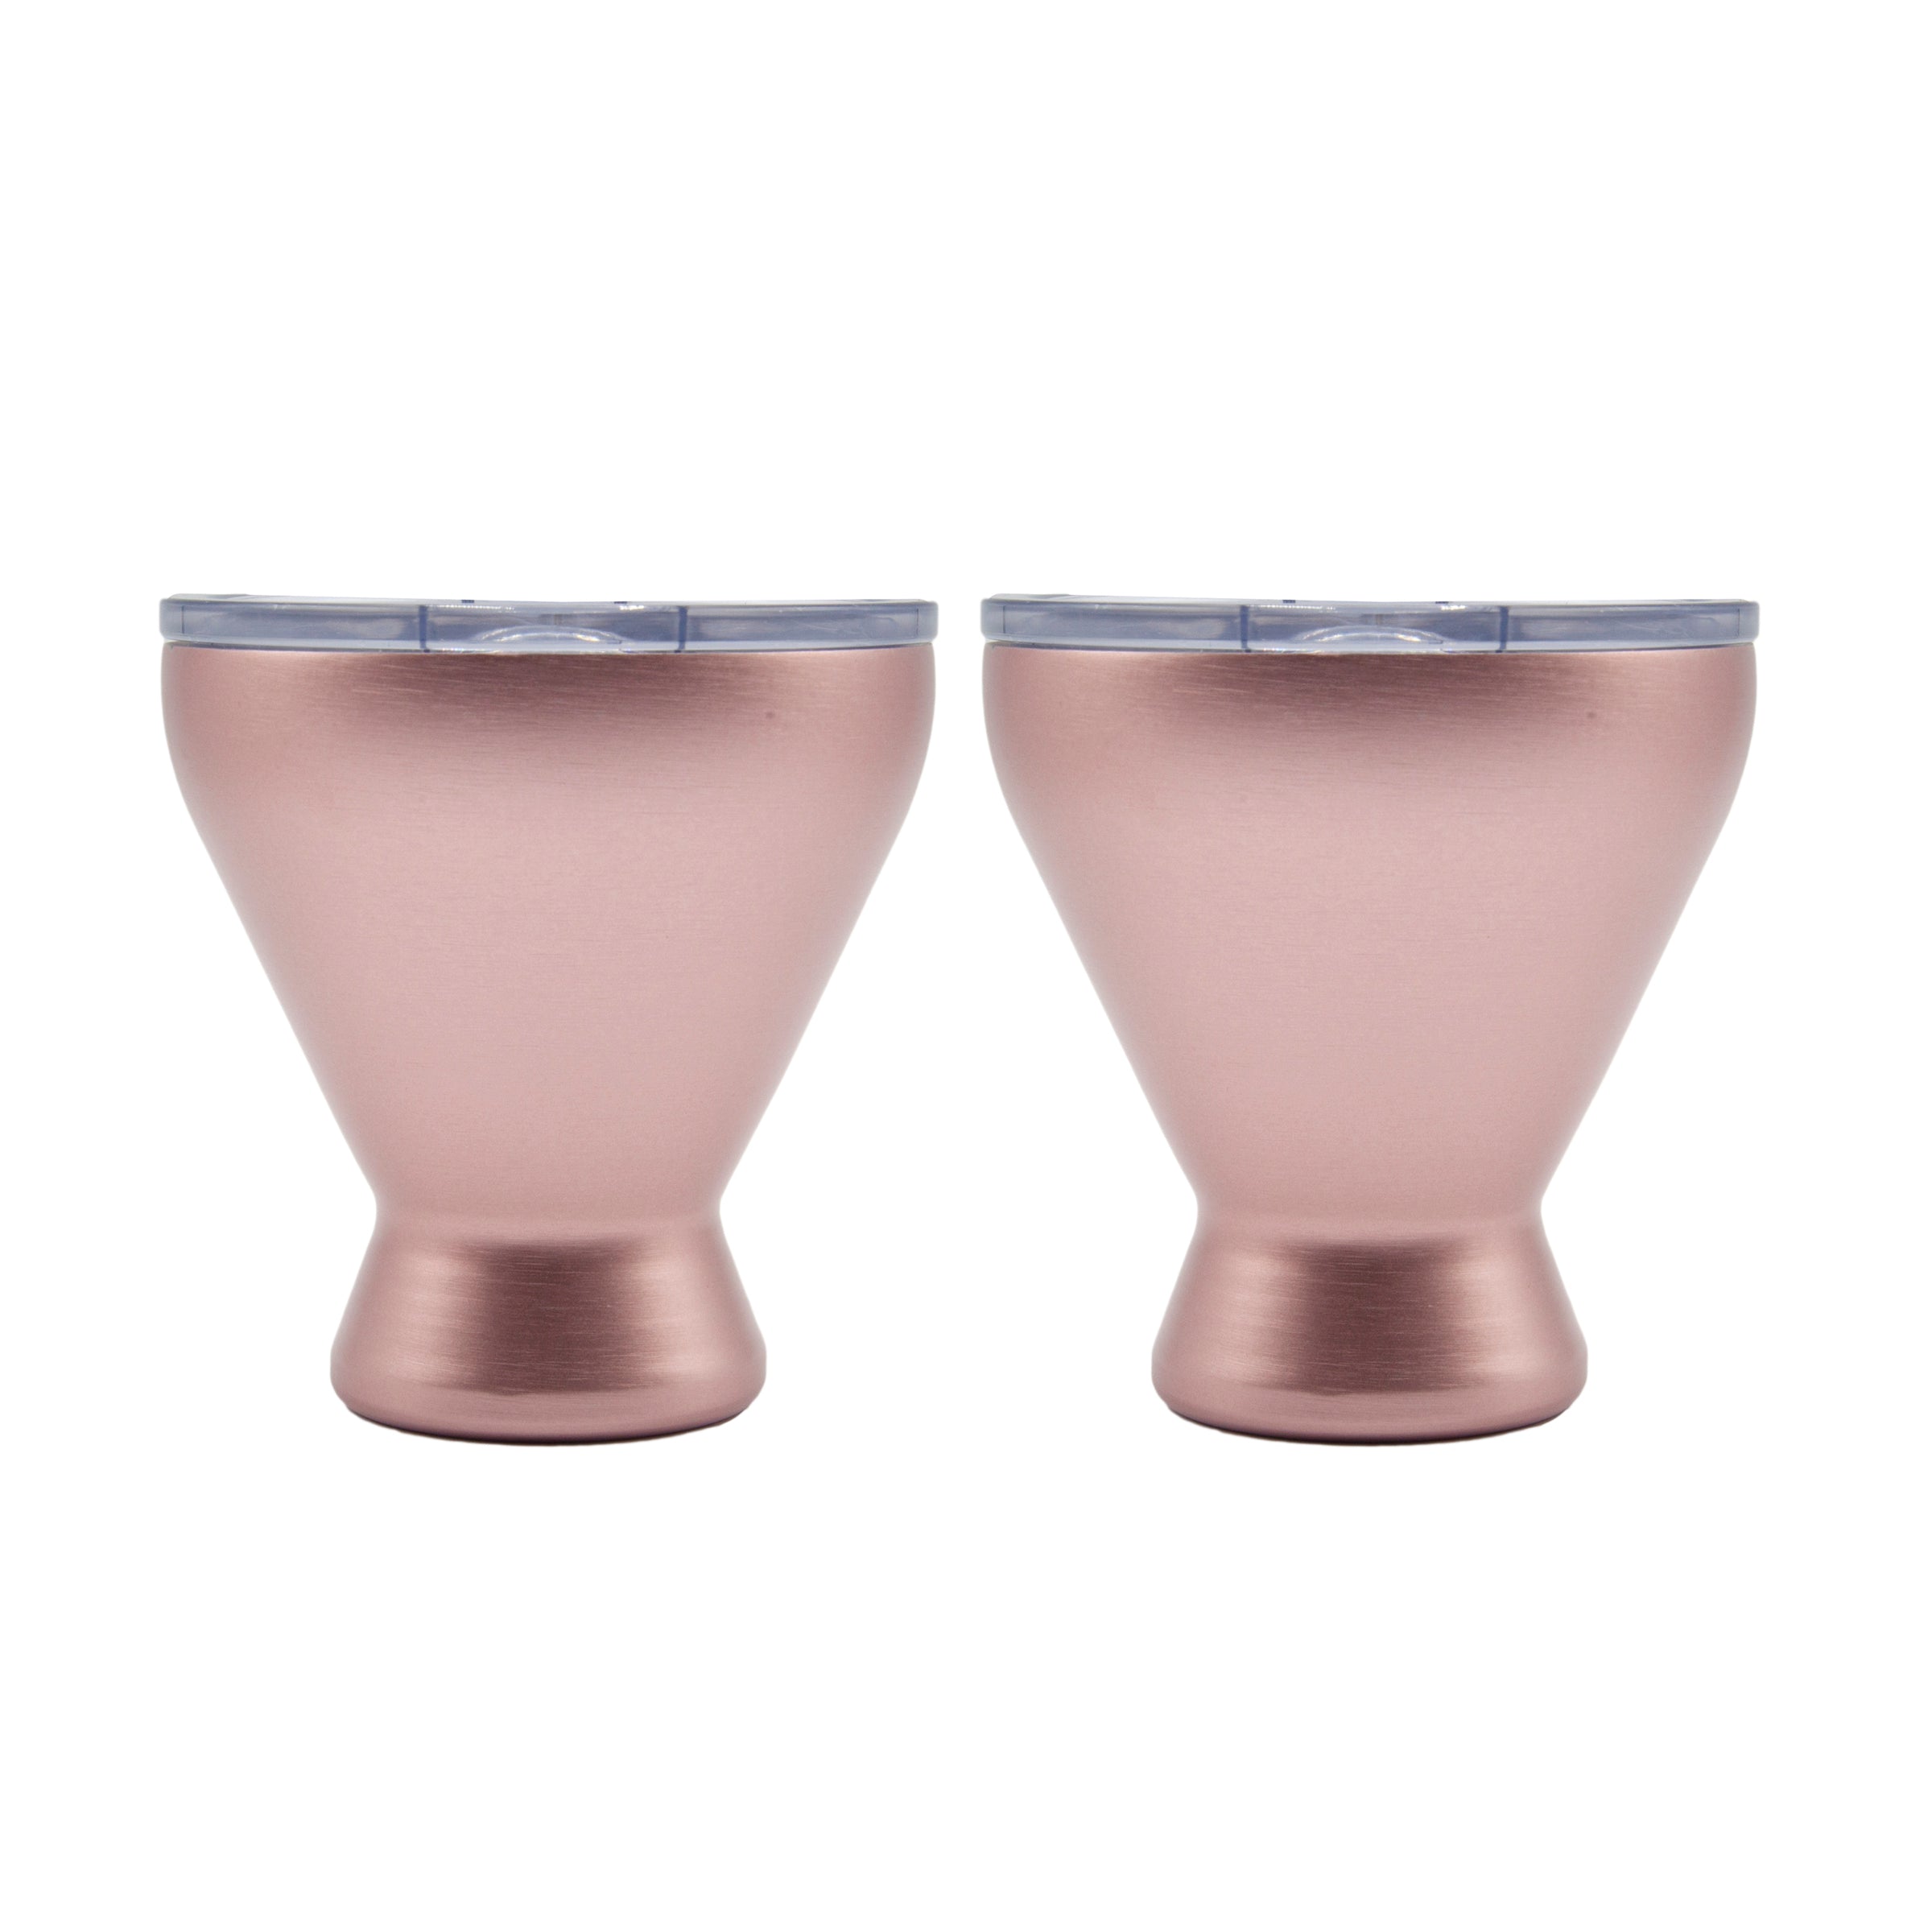 Cambridge 11oz Green to Pink Ombre Cocktail Tumbler, Color: Pink Ombre -  JCPenney